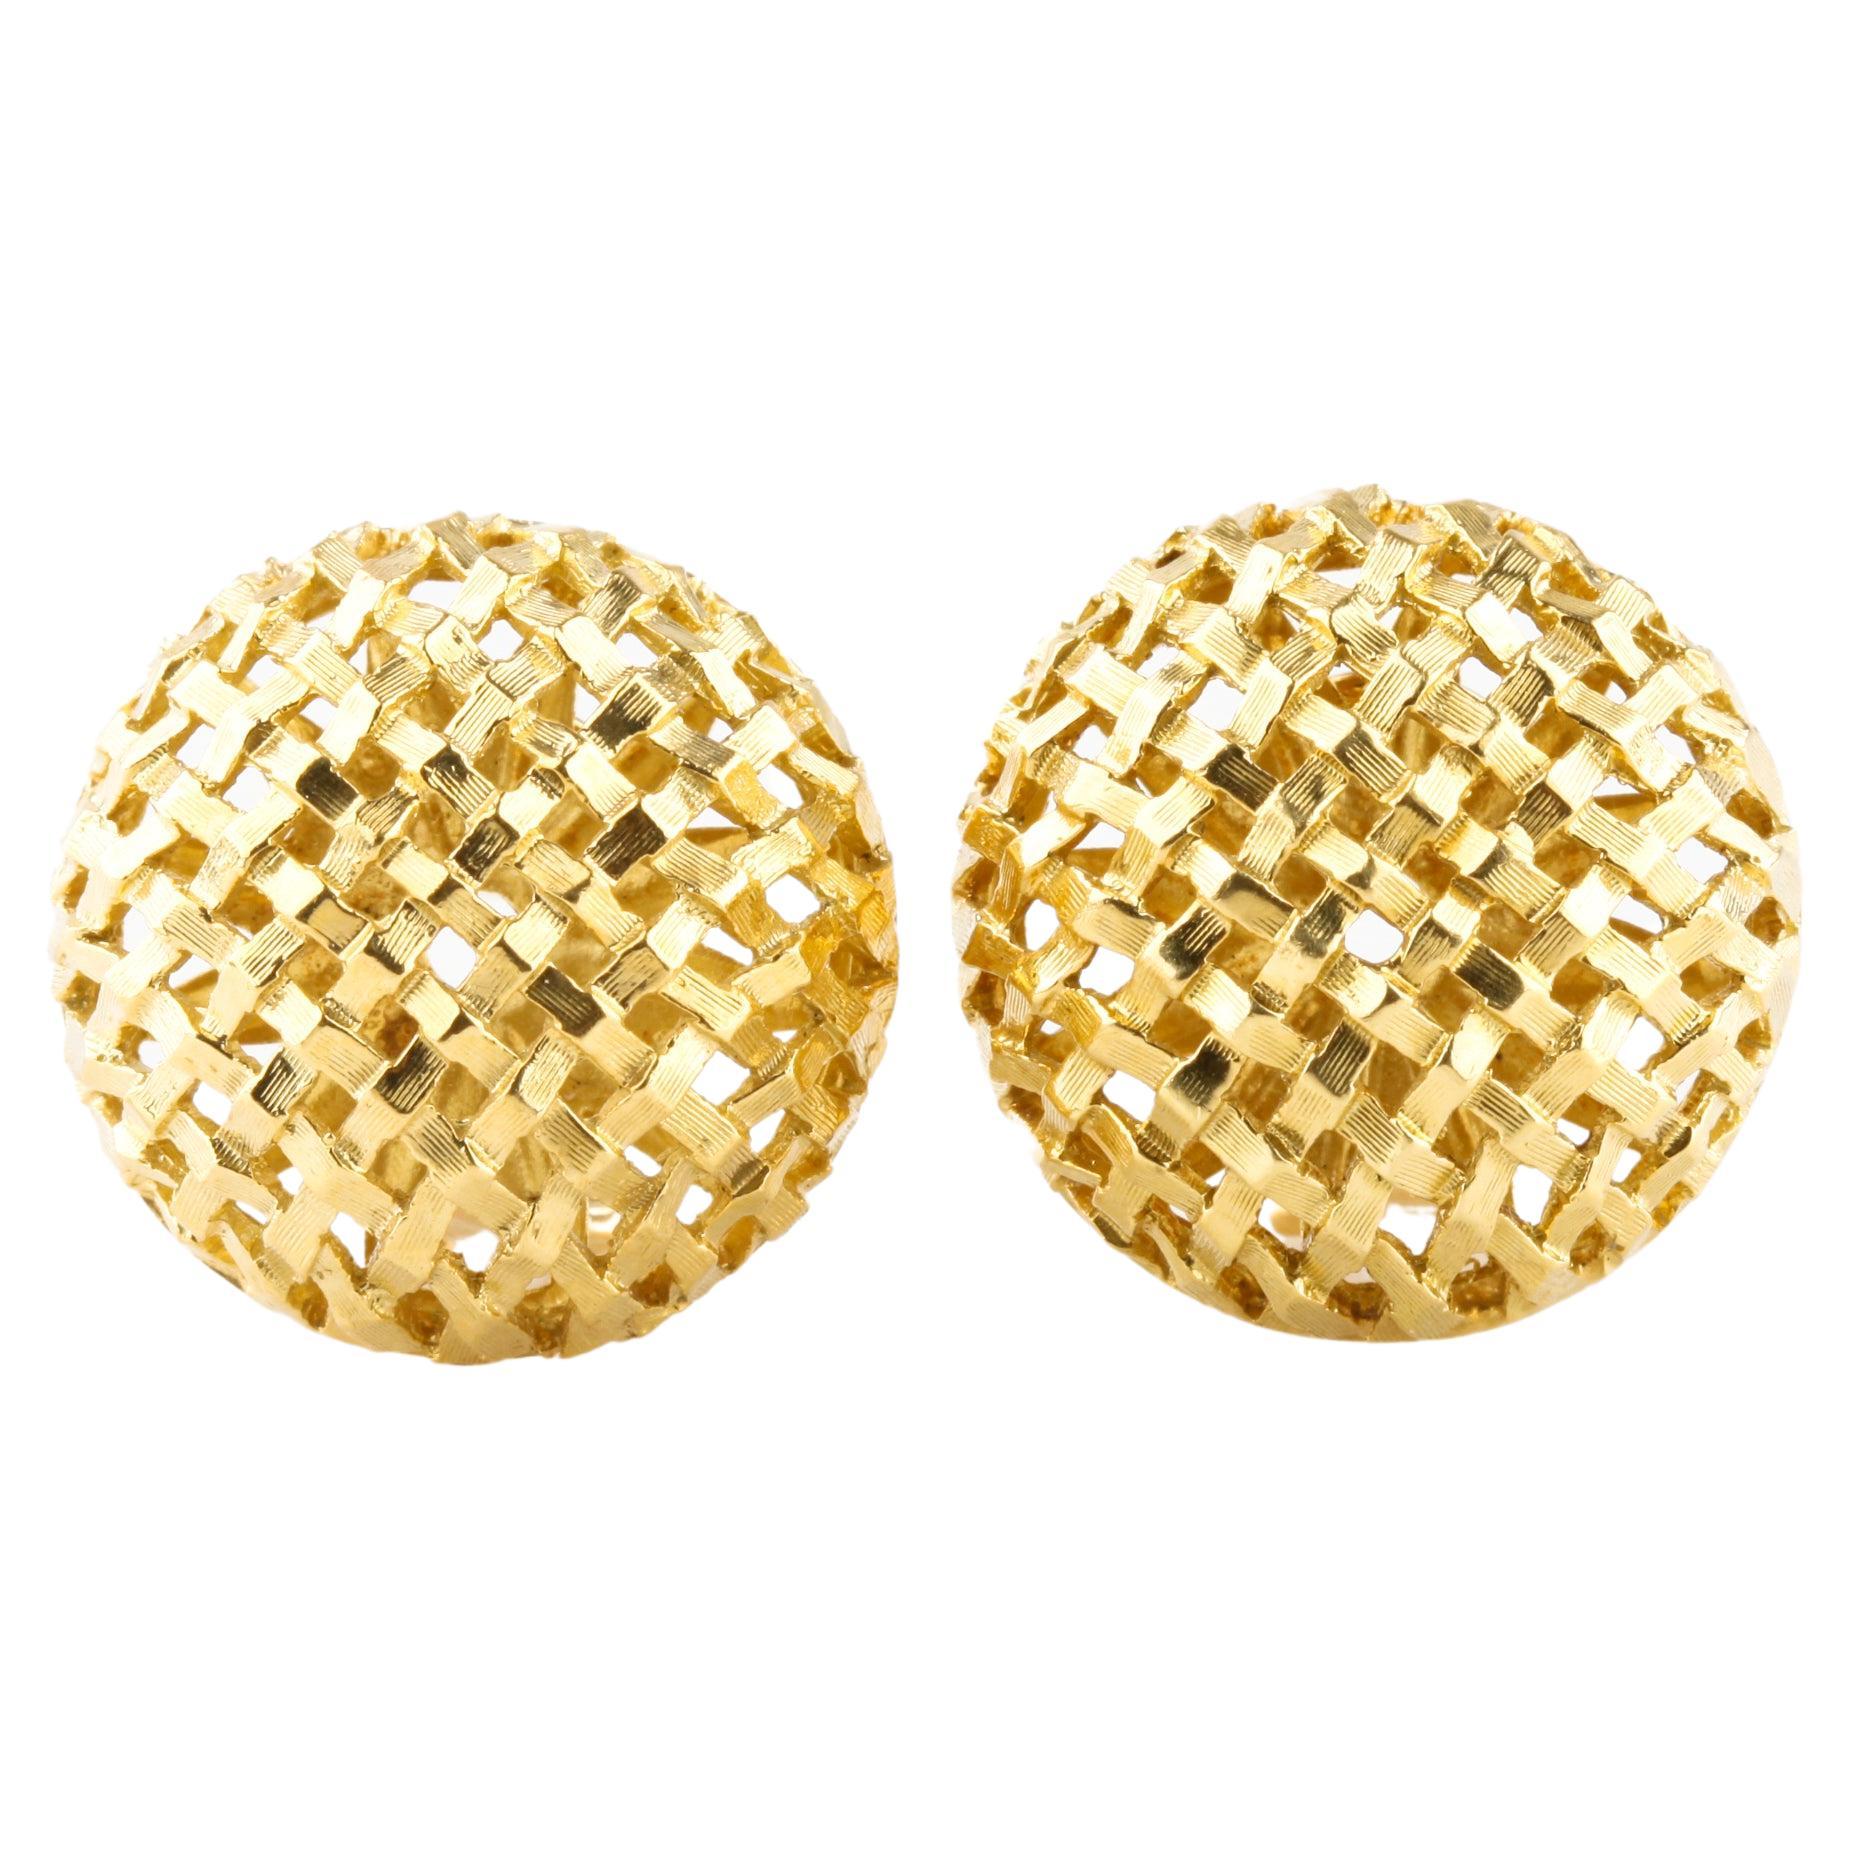 Gorgeous 18k Yellow Gold Basketweave Mesh Dome Huggie Earrings with Omega Backs For Sale